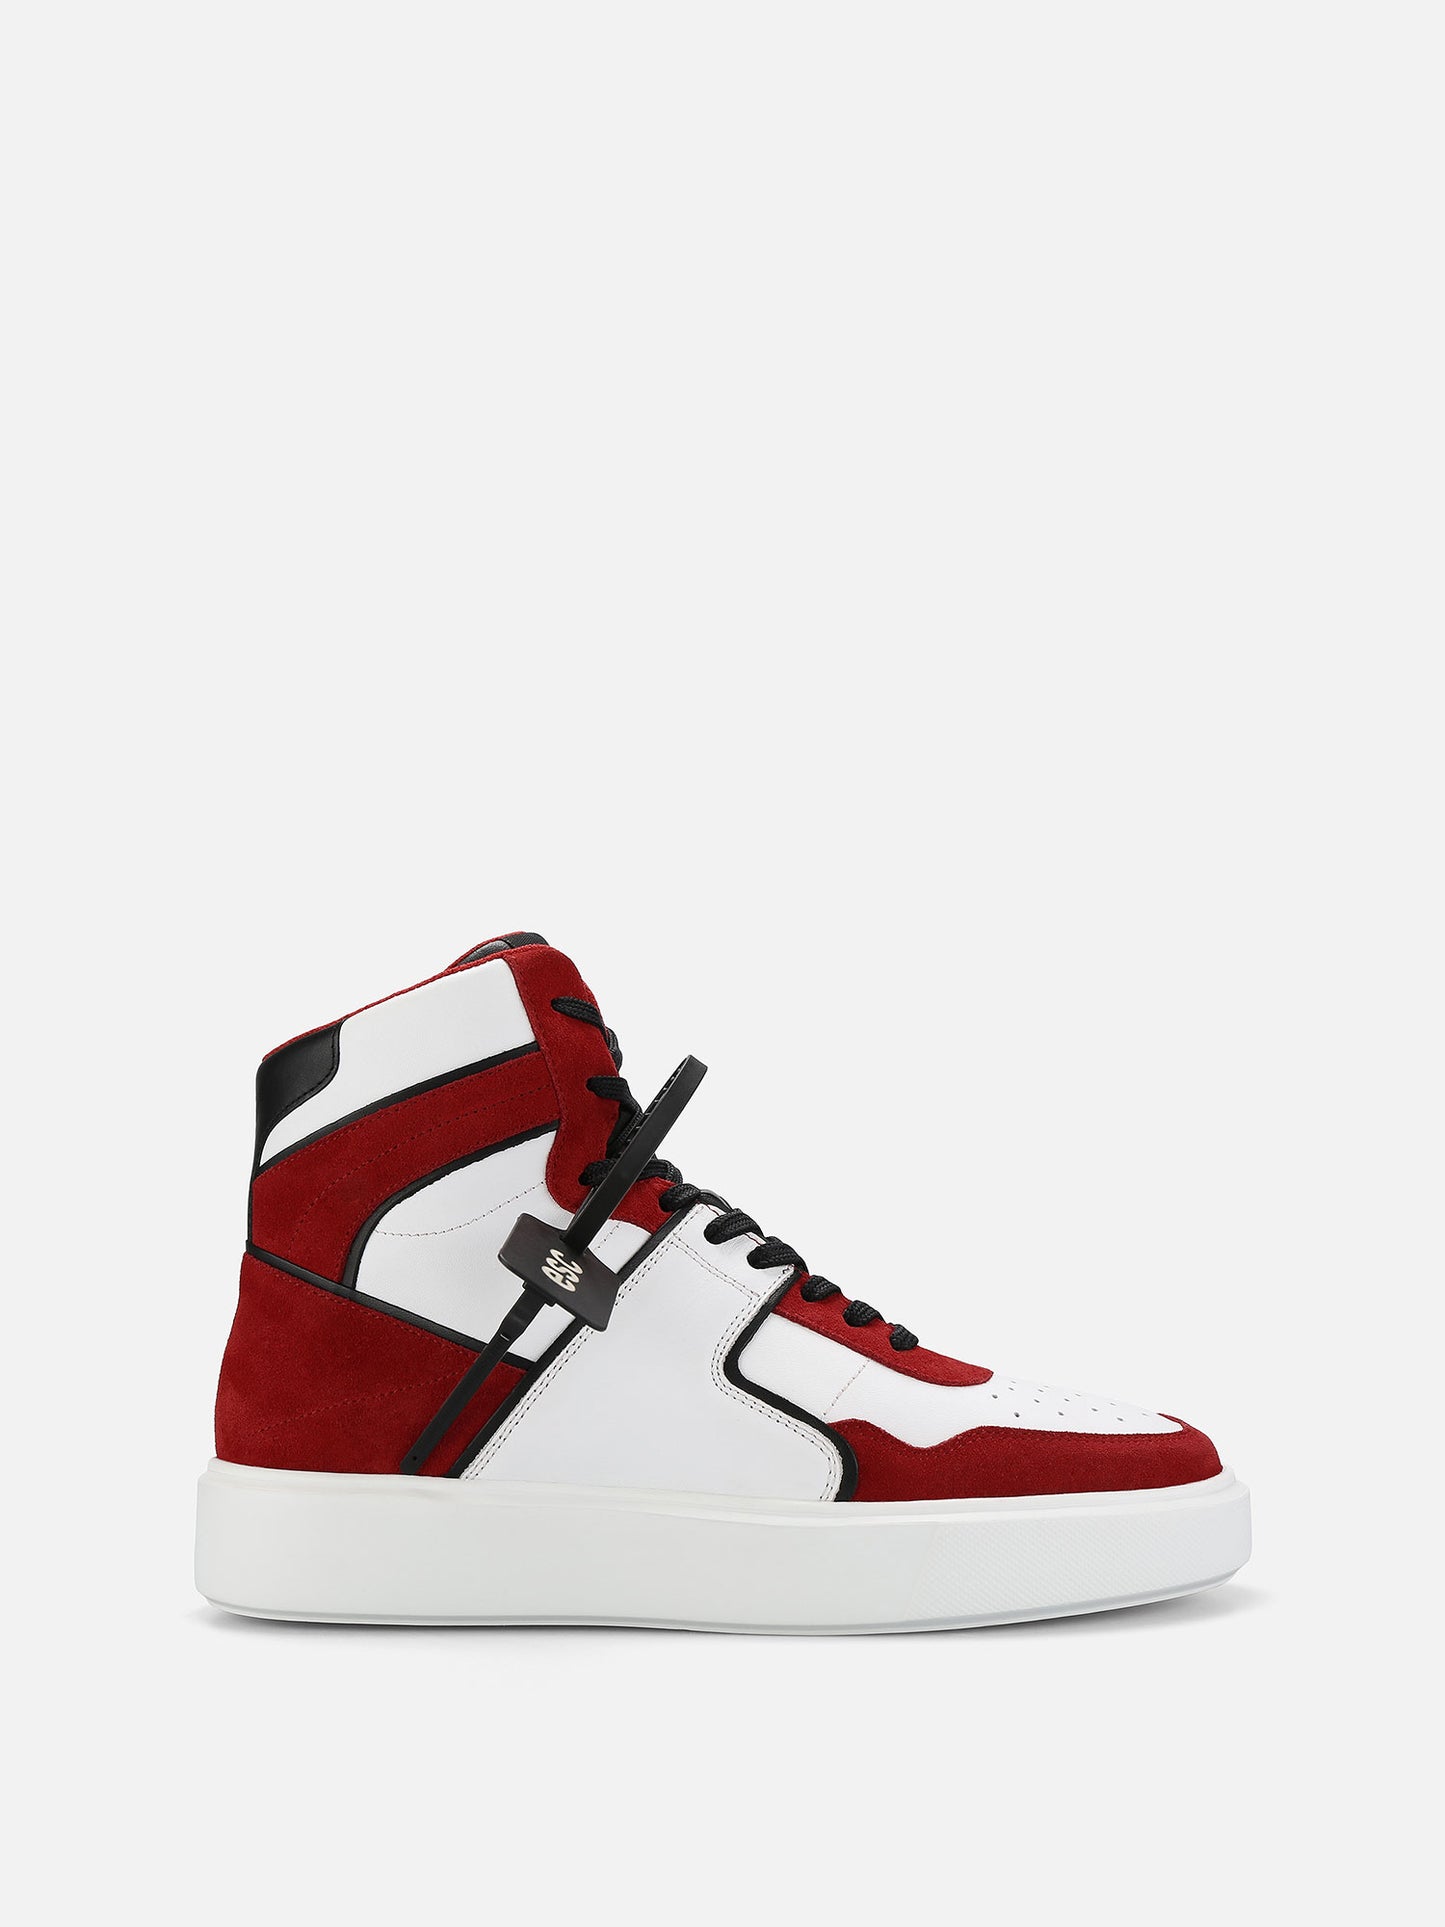 BRYANT Leather Retro Sneakers - Red